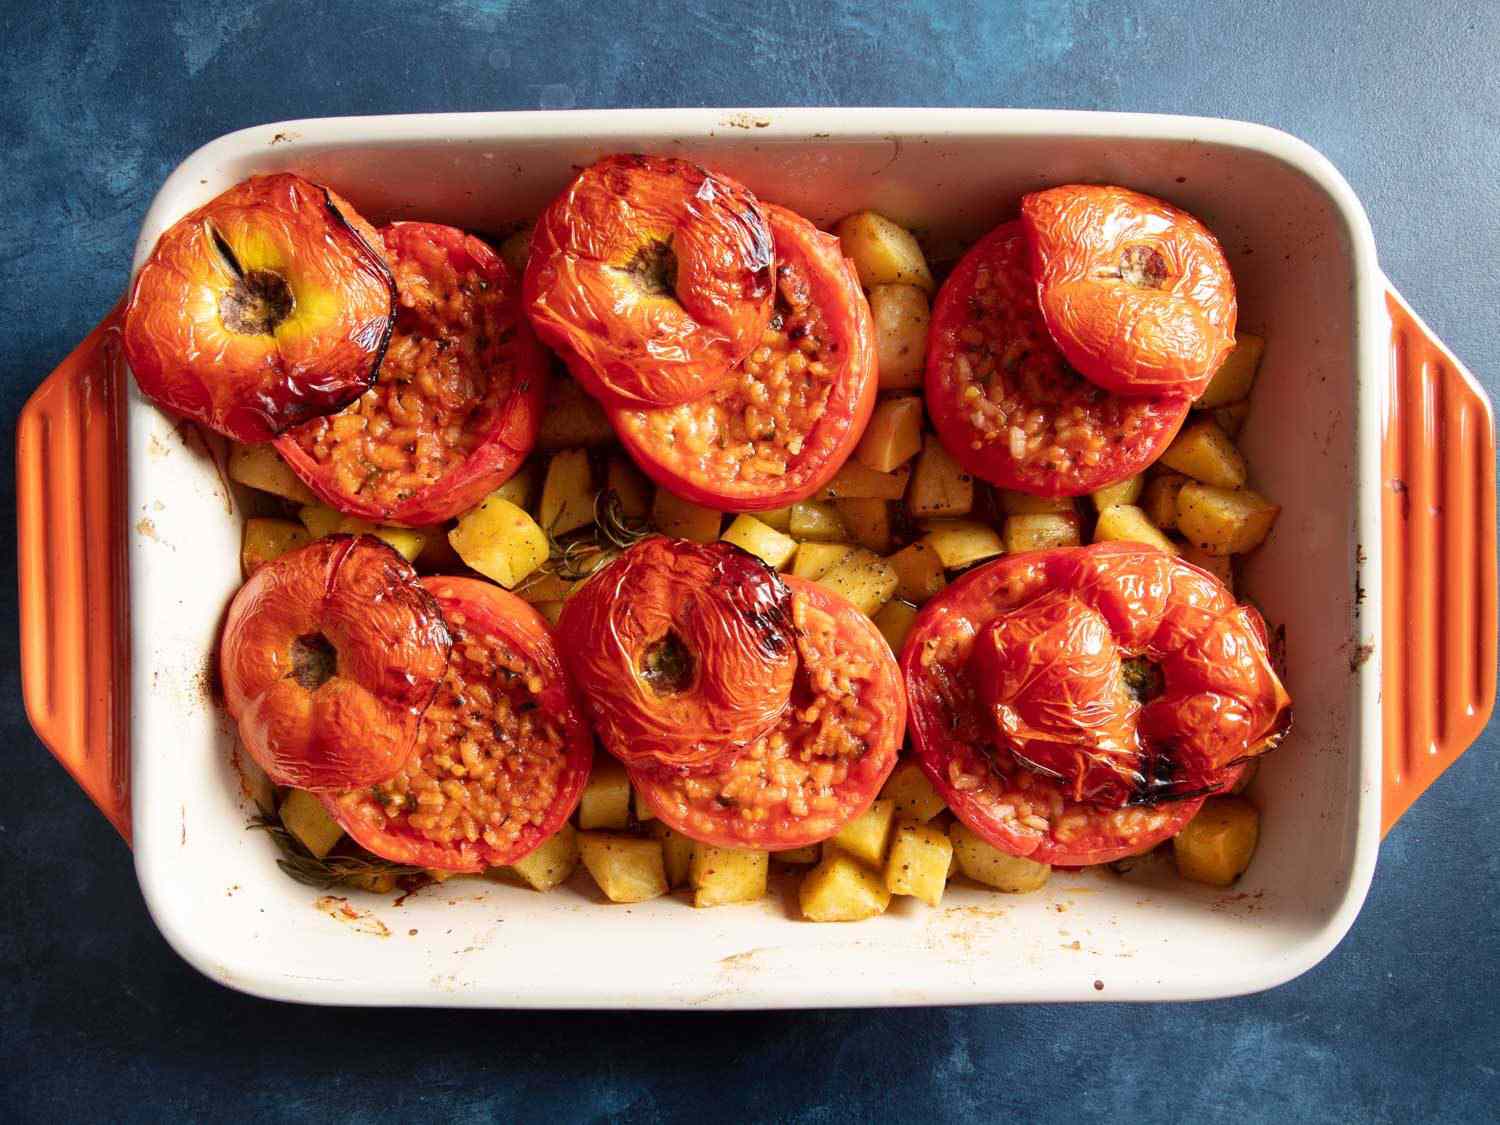 Overhead of baking dish with finished rice-stuffed tomatoes and roast potatoes.